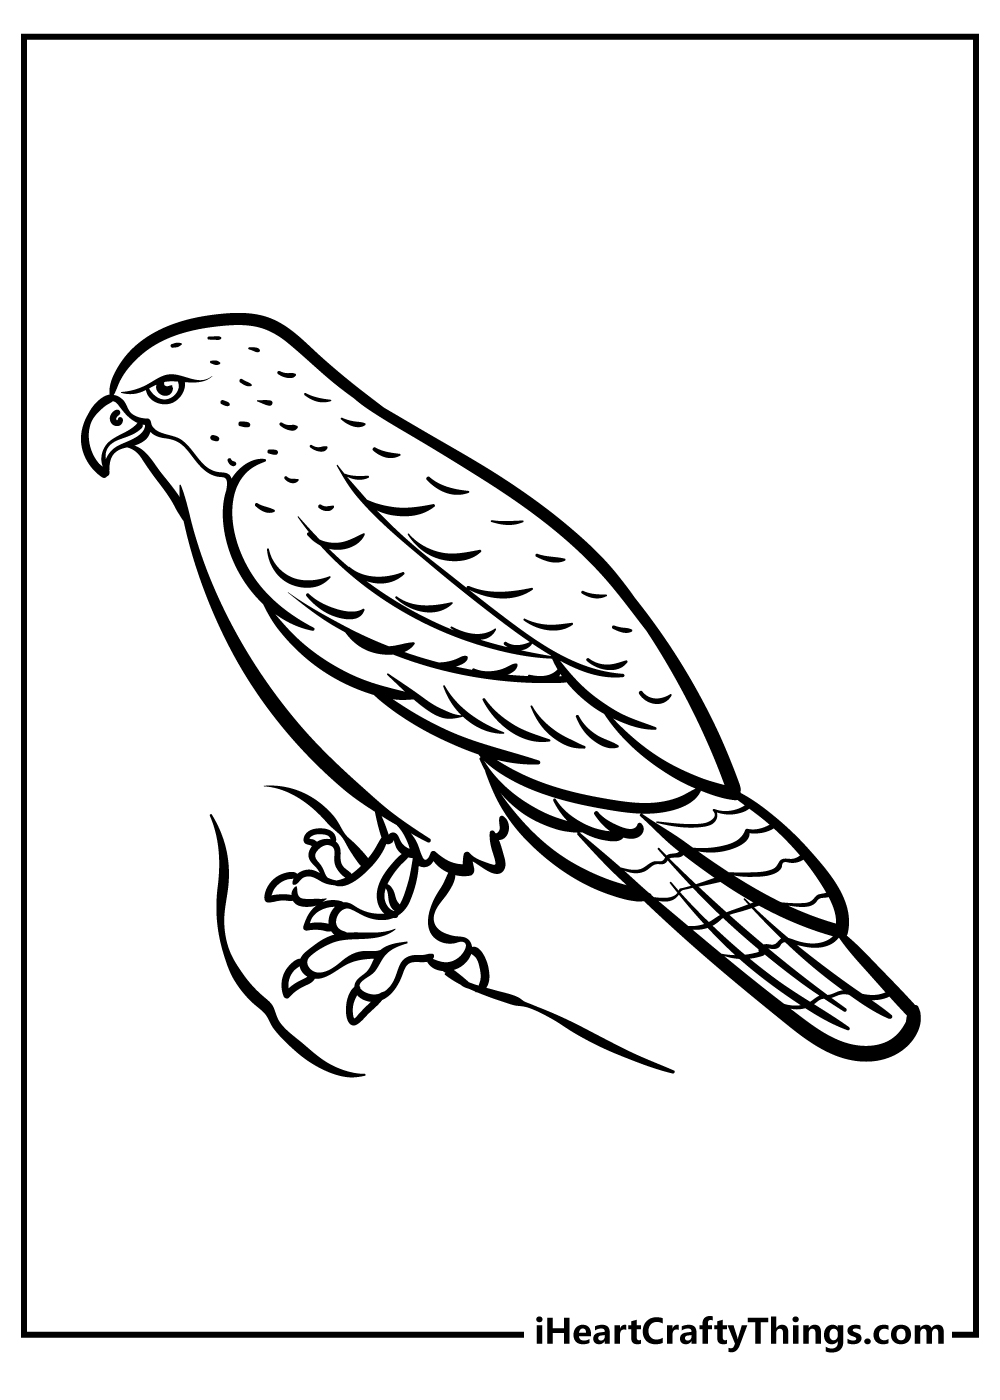 Hawk Coloring Pages for preschoolers free printable